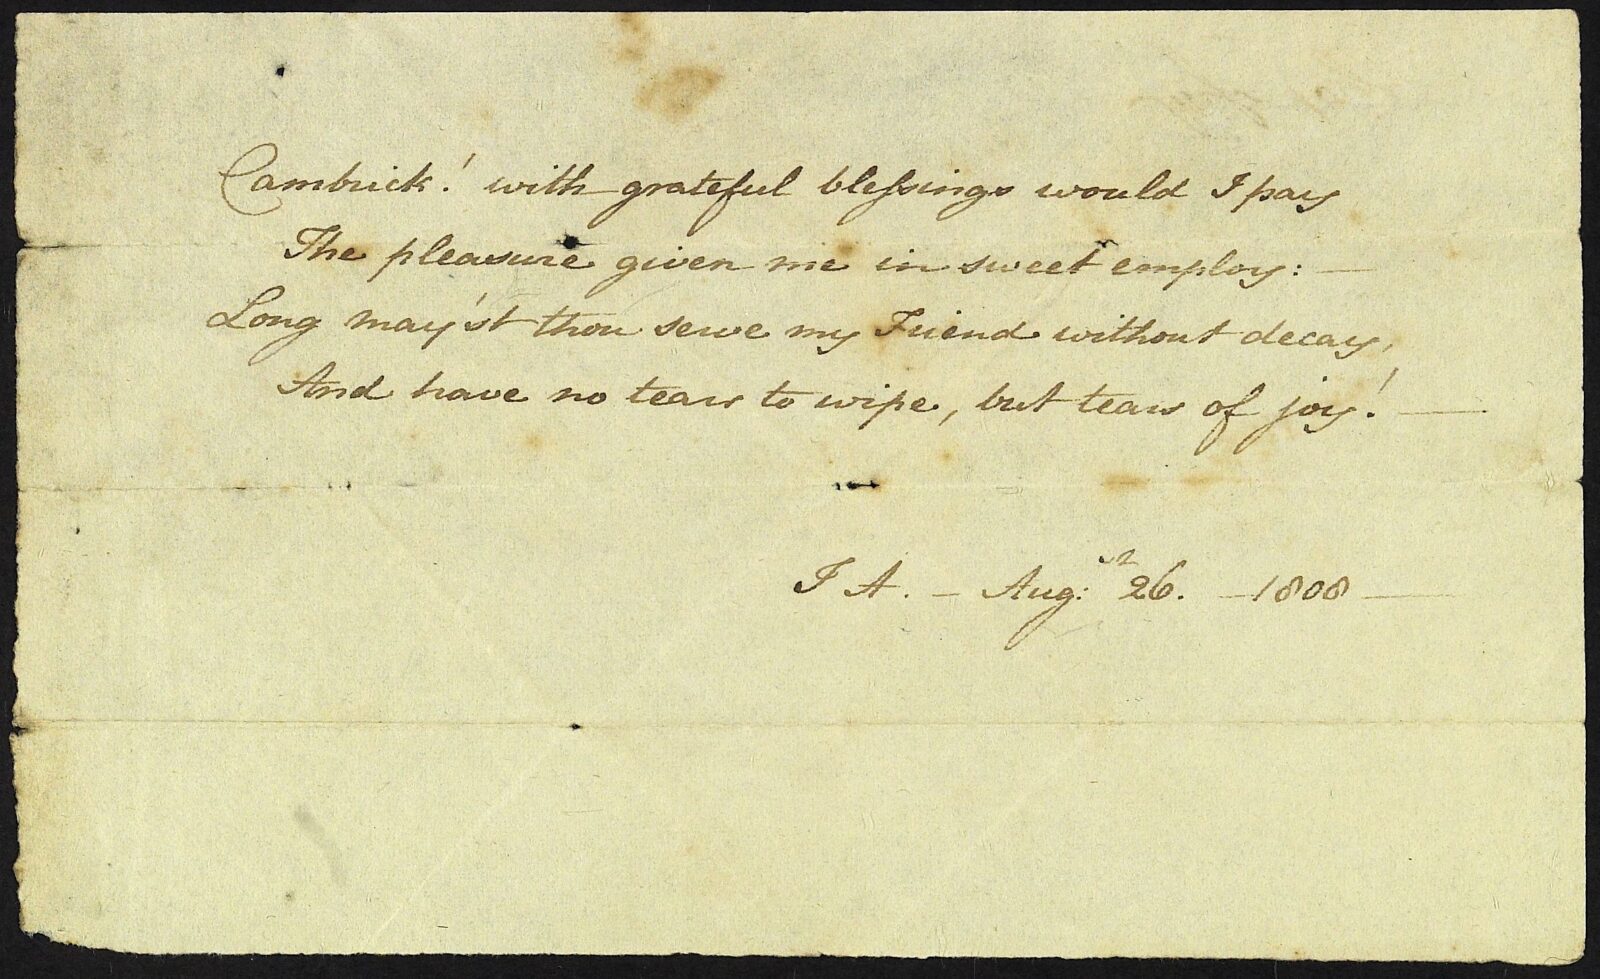 Four lines of verse by Jane Austen to Catherine Bigg dated 26th August 1808, to accompany a wedding gift of handkerchiefs.